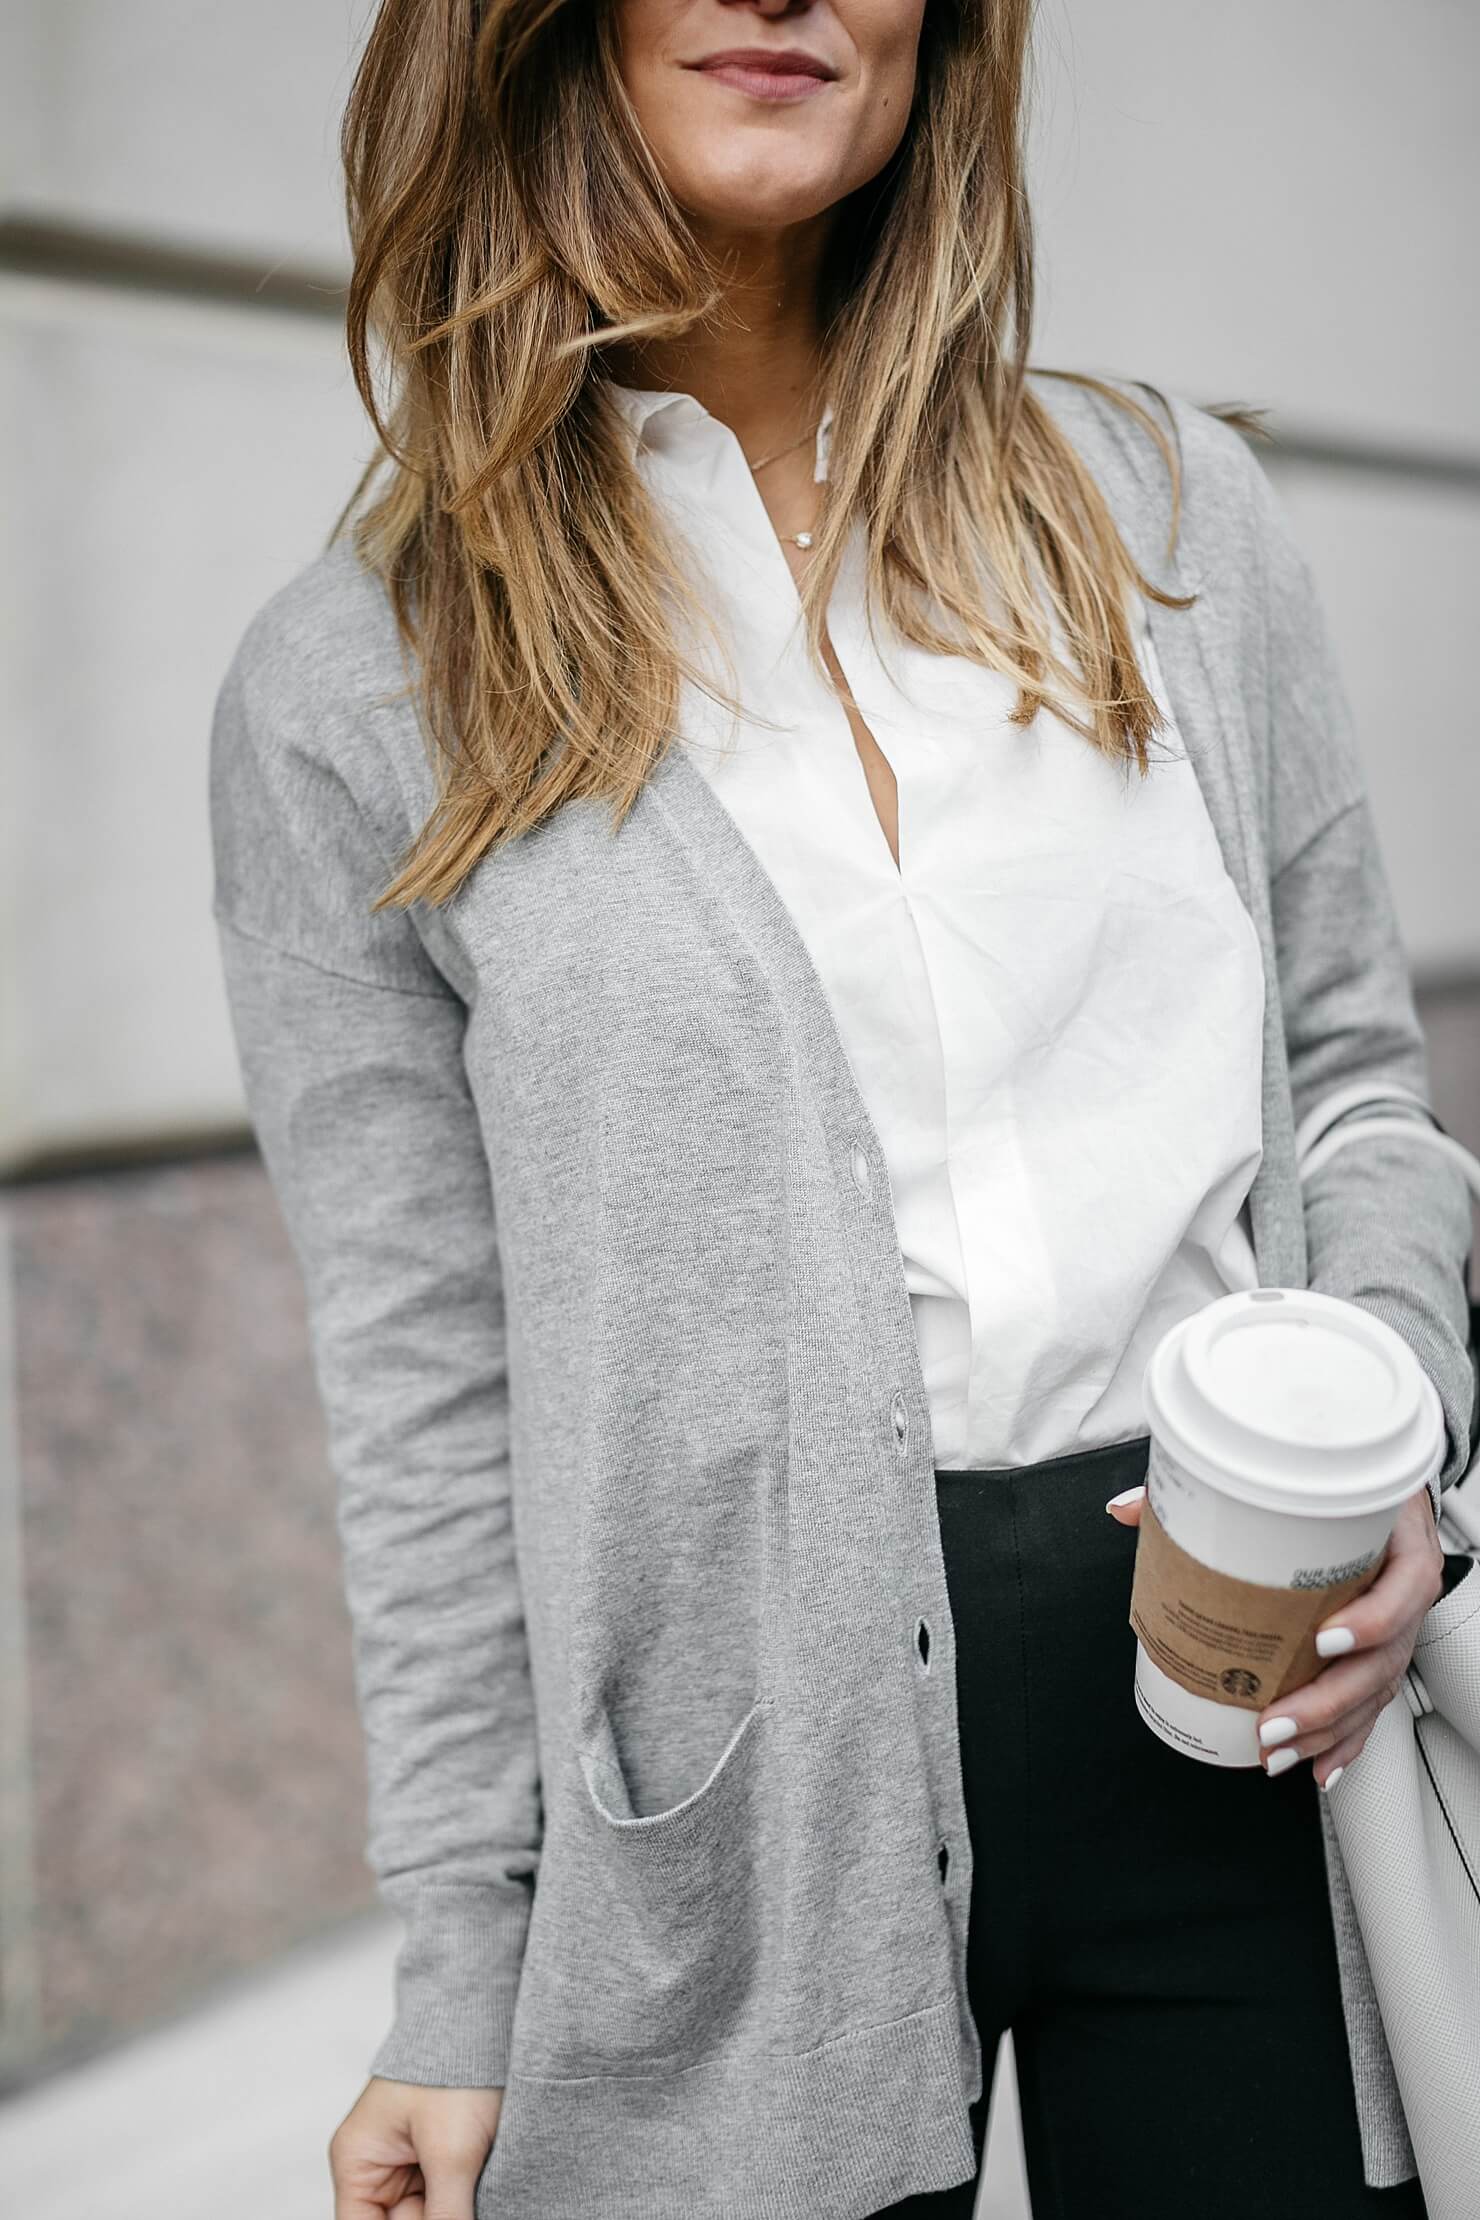 grey lightweight cardigan, white button down shirt, black ponte pants, and kitten heels // business casual outfit ideas